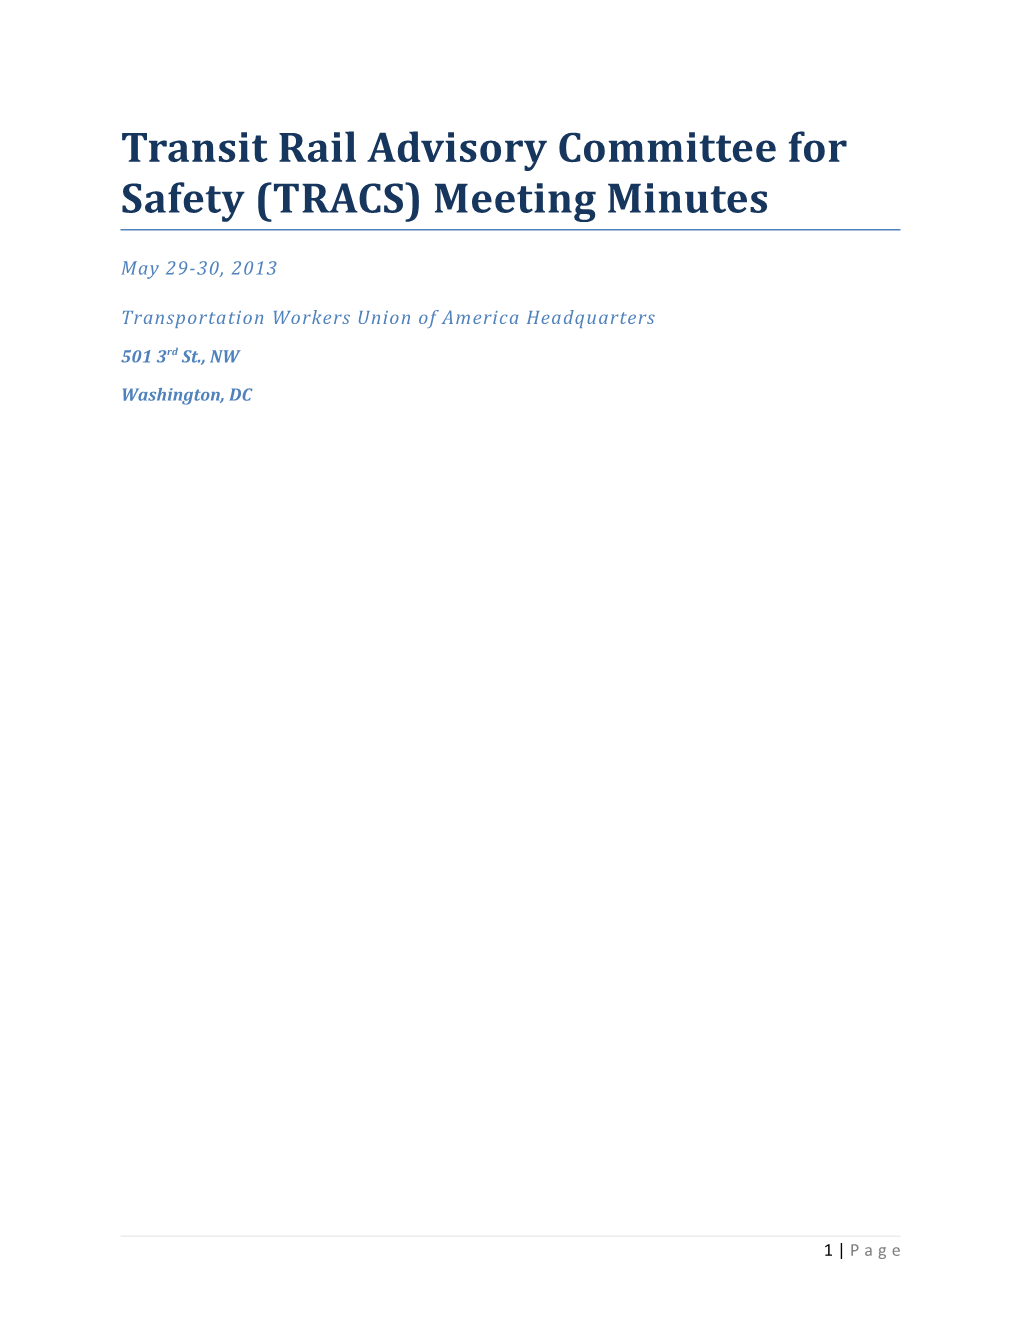 Transit Rail Advisory Committee for Safety (TRACS)Meeting Minutes